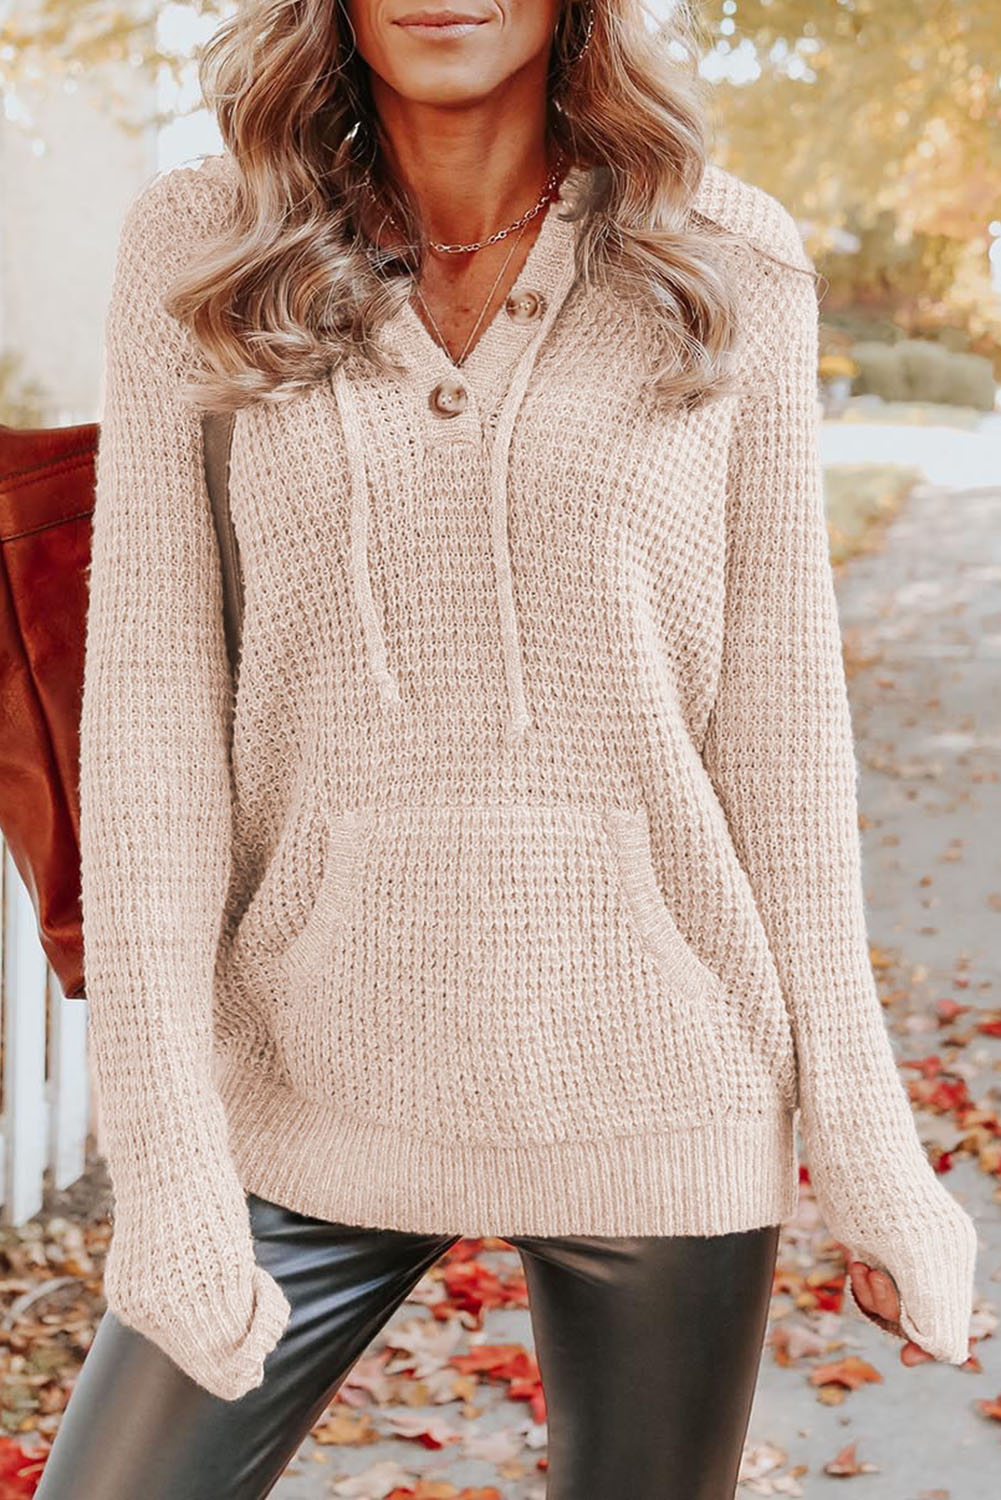 Apricot Waffle Knit Buttons Hooded Sweater with Pocket Item NO.: 2557